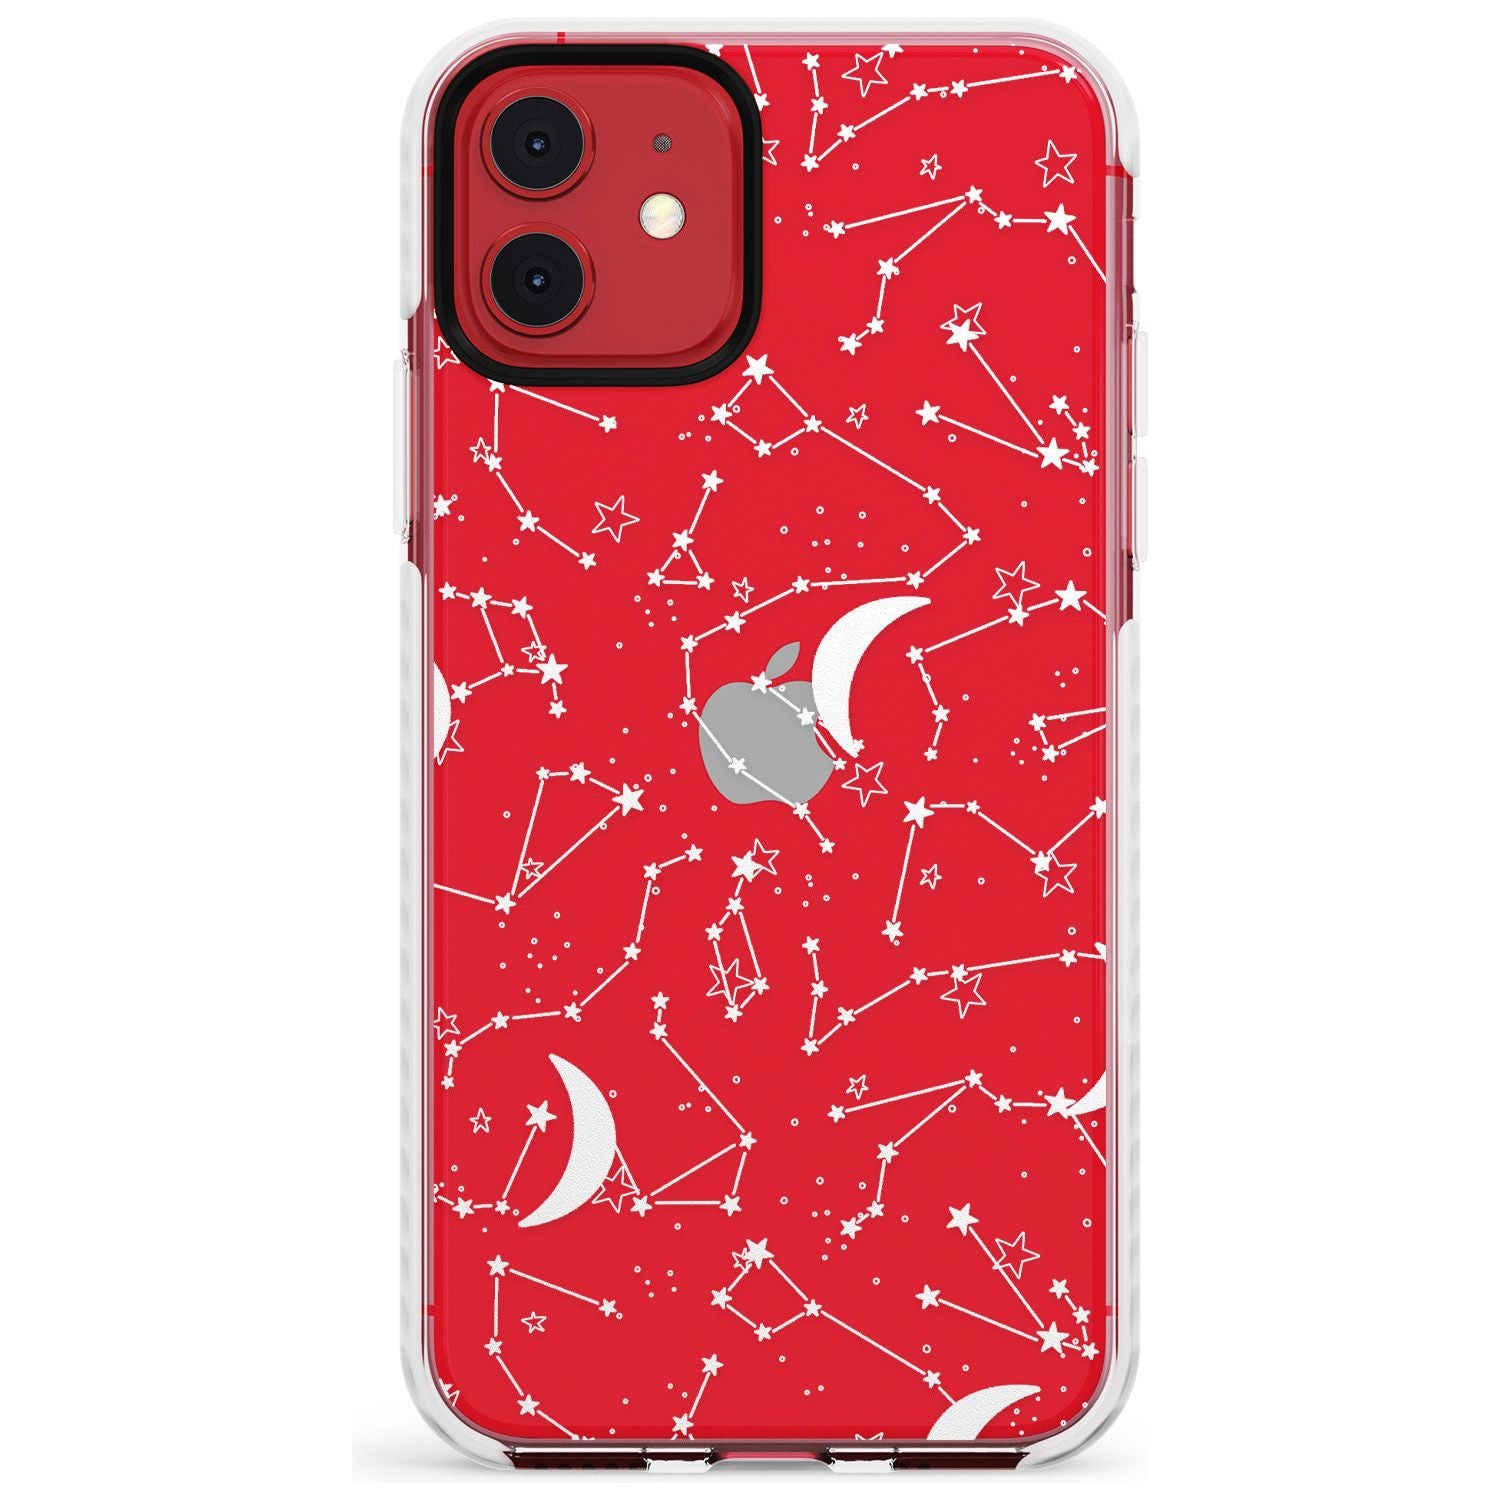 White Constellations on Clear Slim TPU Phone Case for iPhone 11